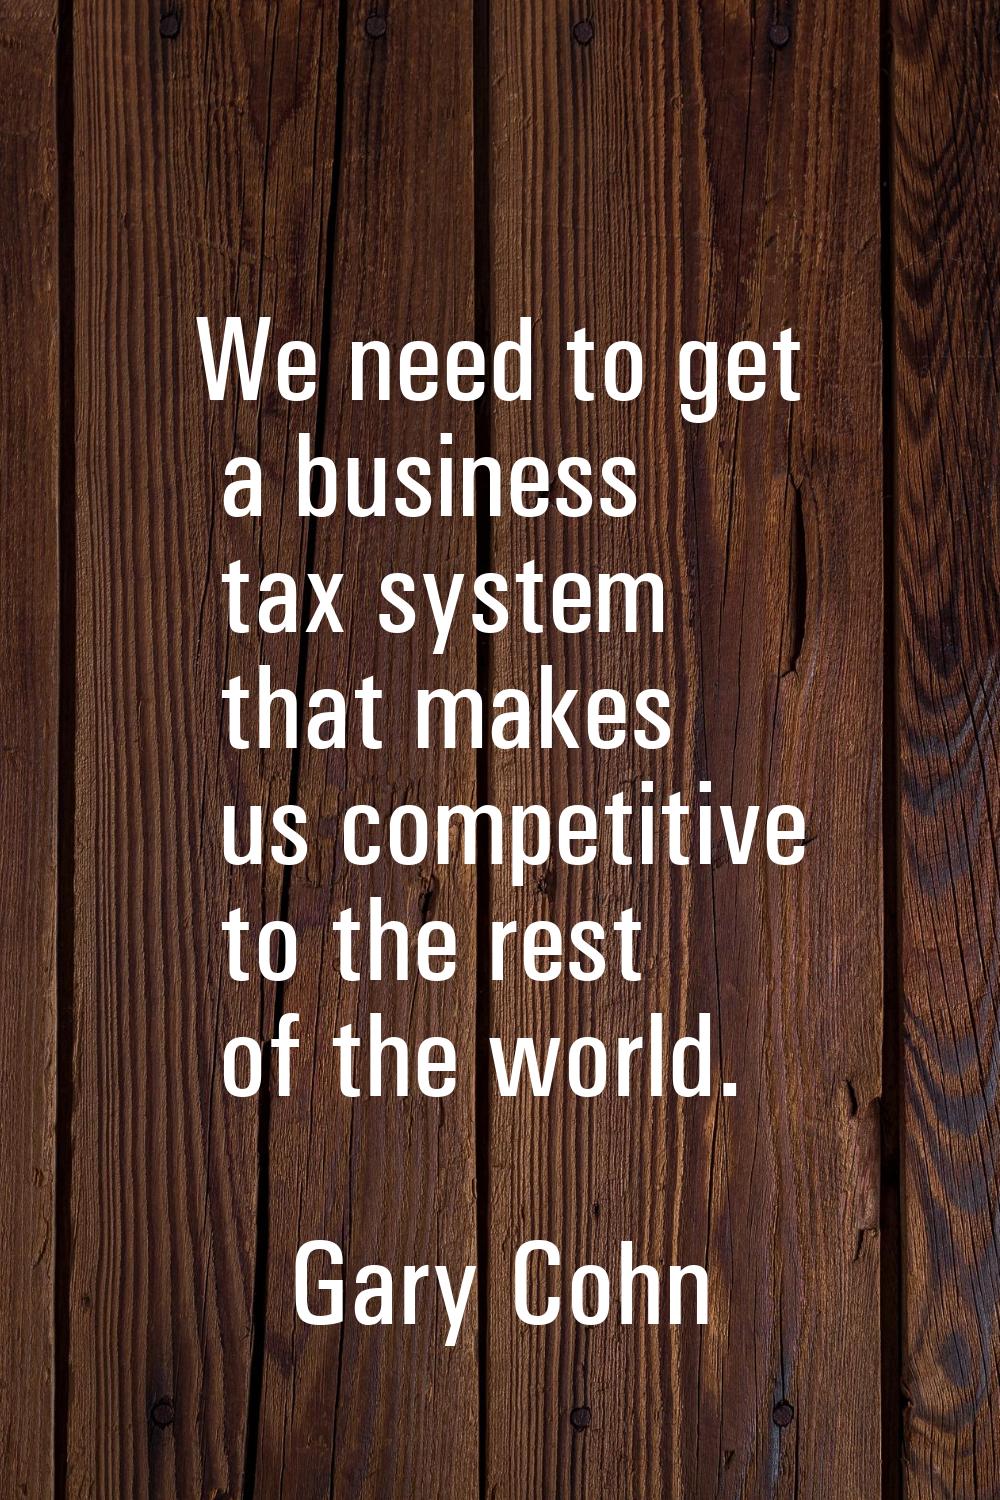 We need to get a business tax system that makes us competitive to the rest of the world.